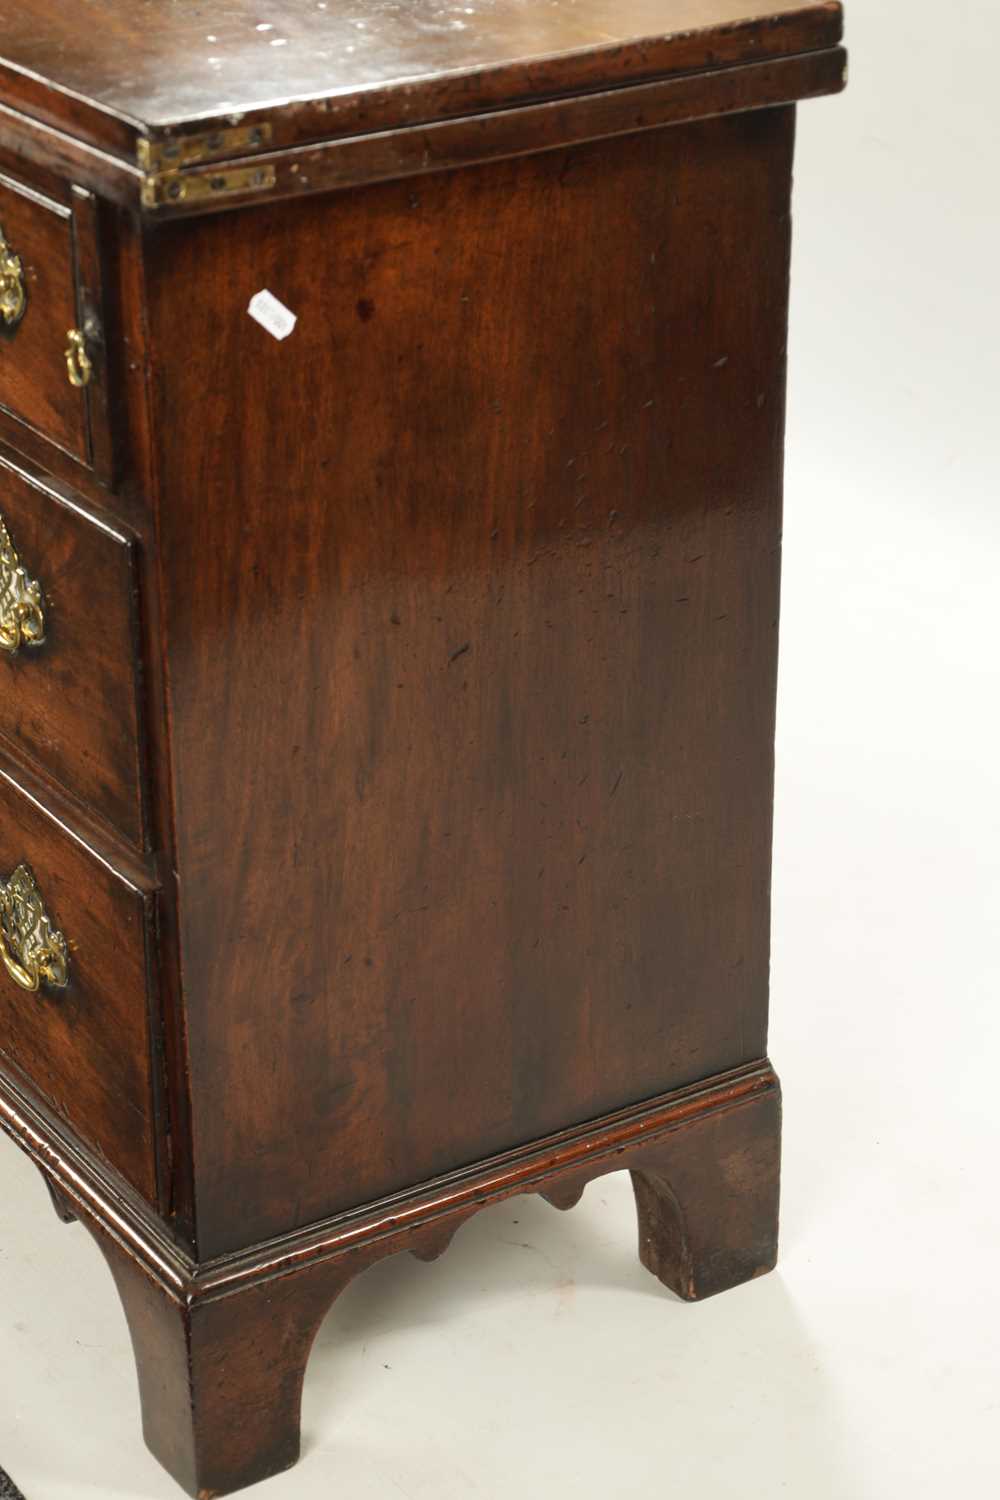 AN EARLY 18TH CENTURY WALNUT BACHELORS CHEST - Image 8 of 8